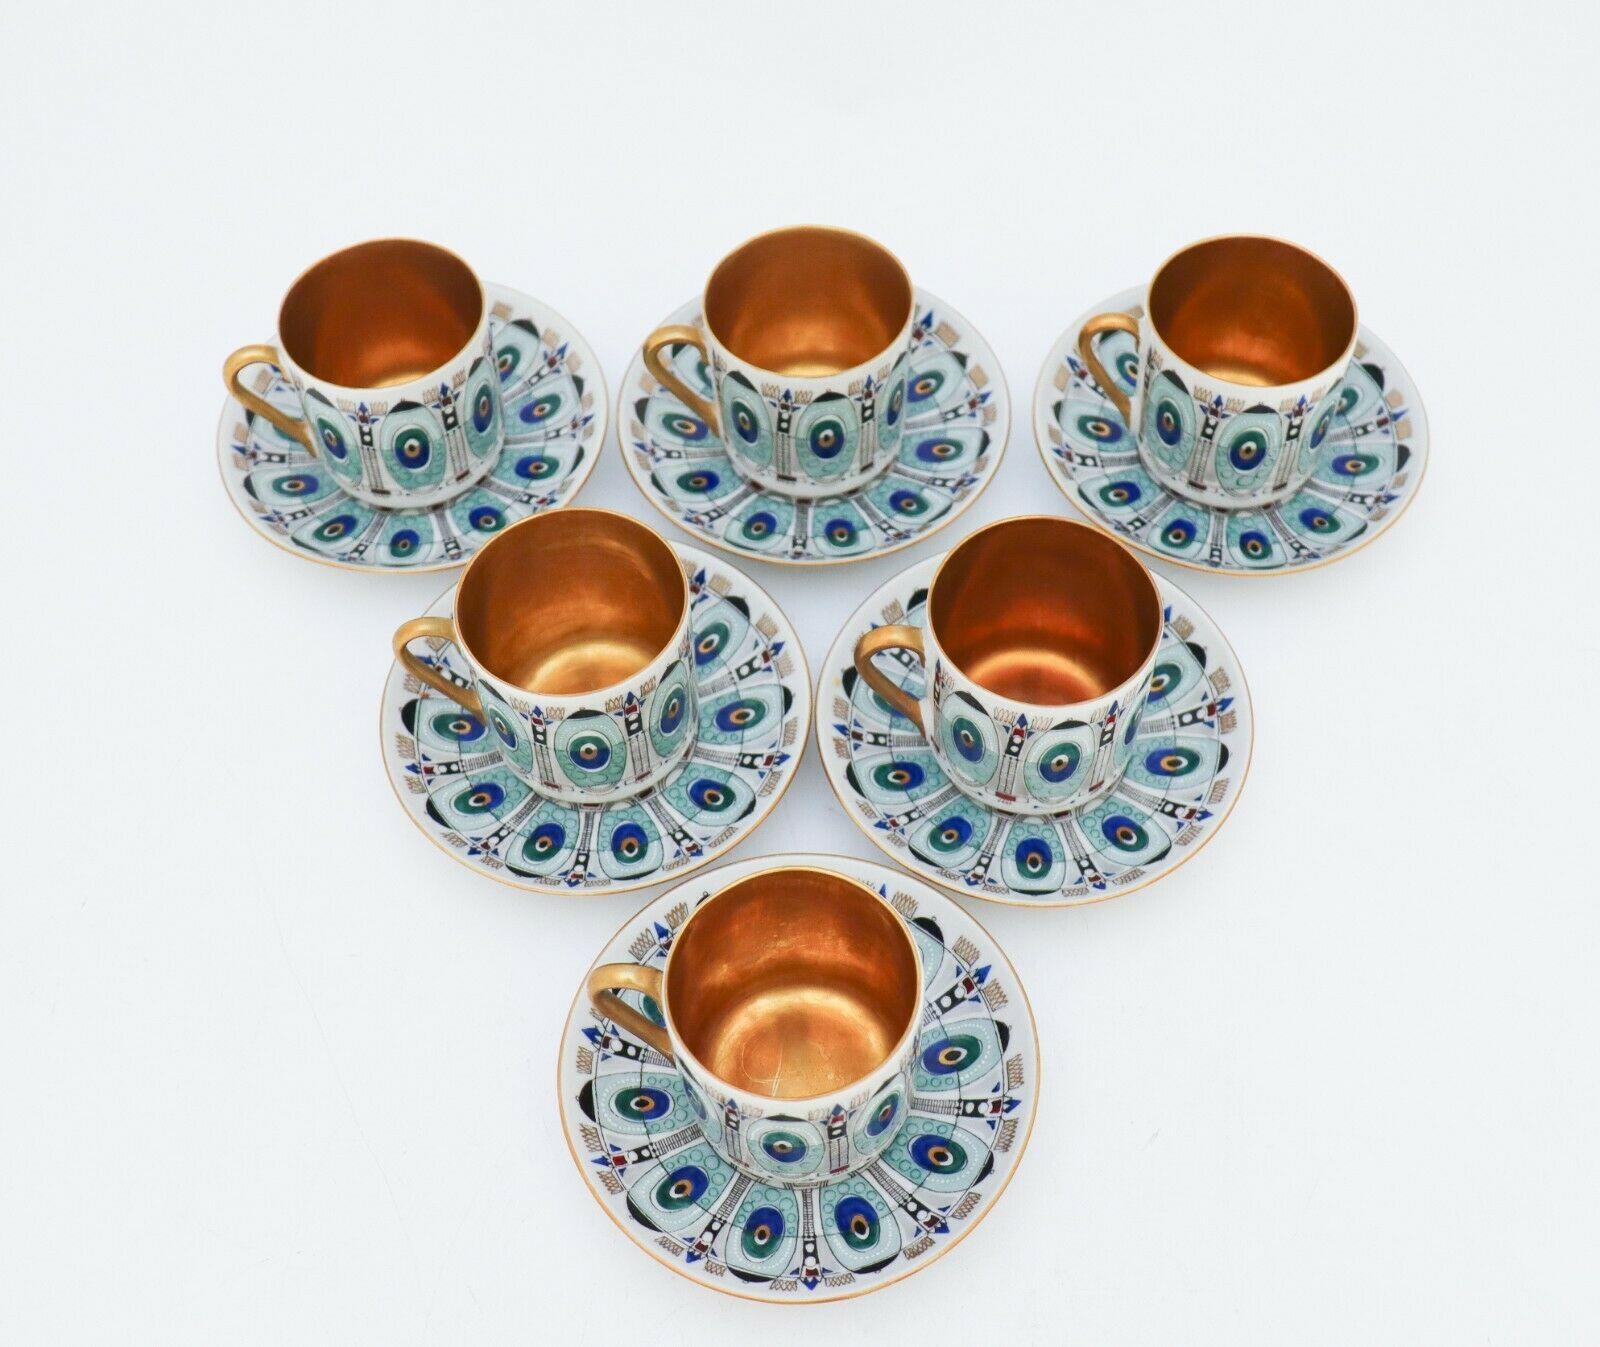 6 Espressocups and saucers of model Eira designed by Raija Liisa Uosikkinen at Arabia. The cups are 5,5 cm in diameter at the top and the saucers are 11 cm in diameter. They are all in very good condition except from some minor scratches on the